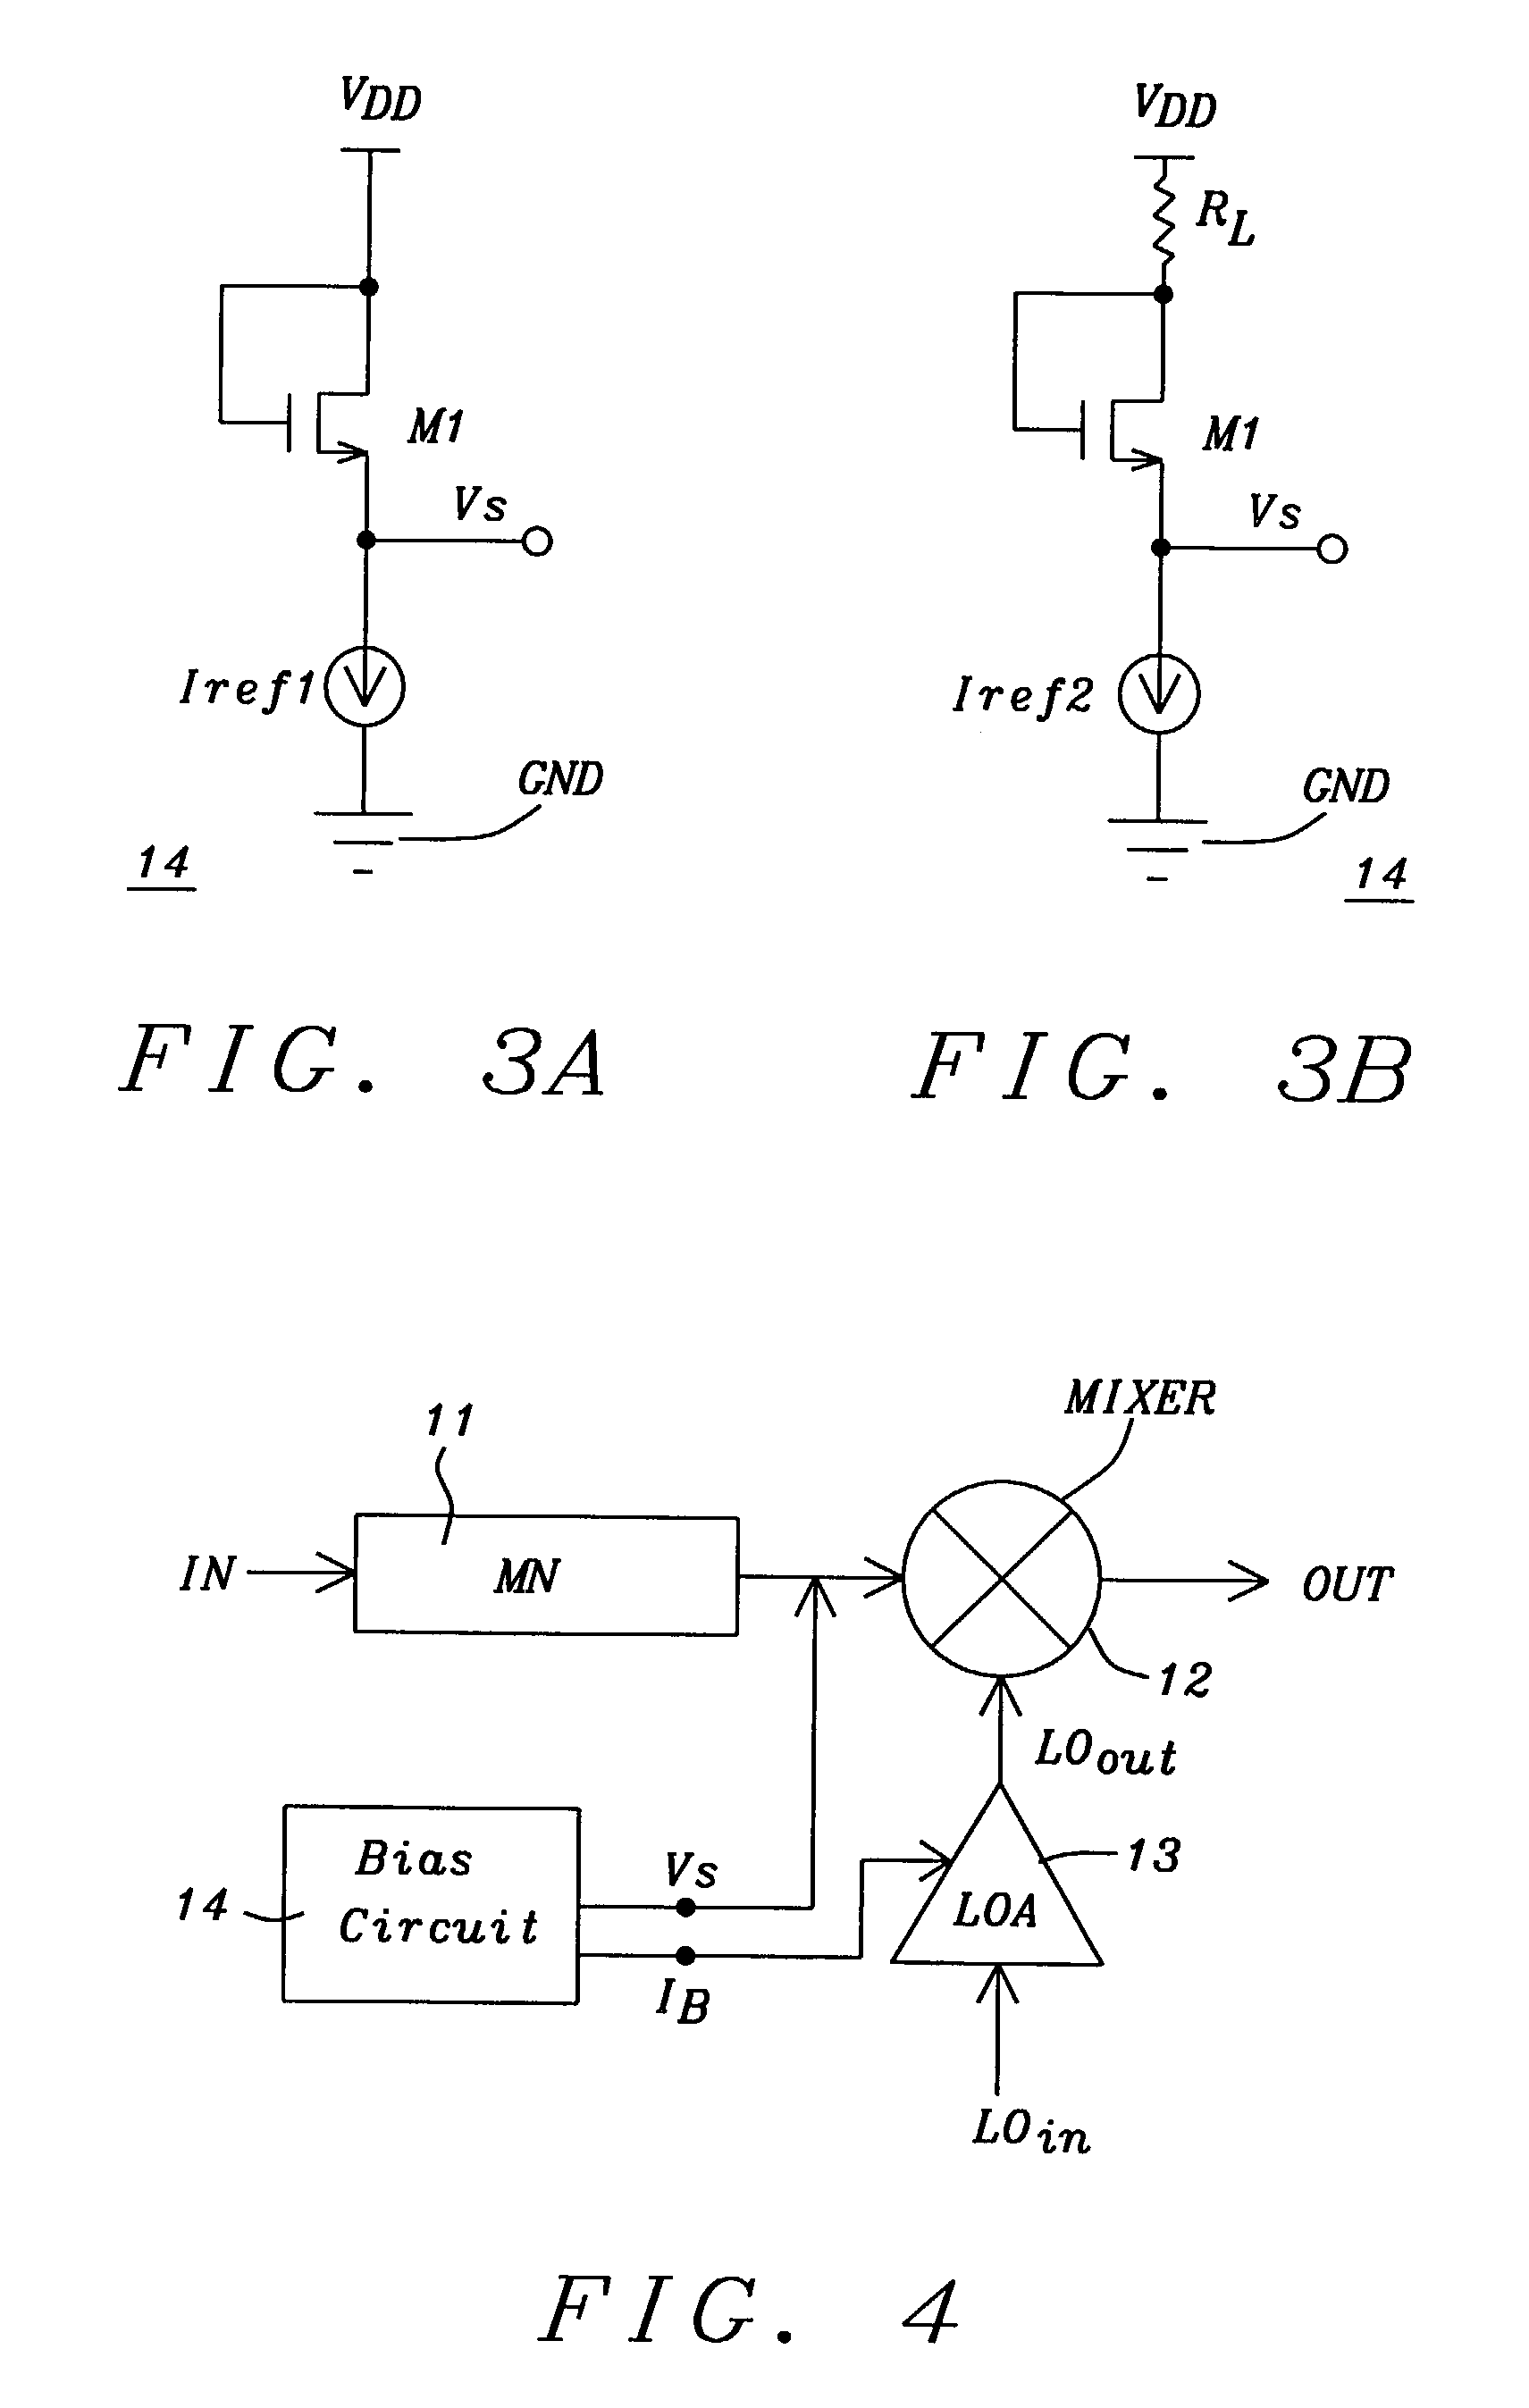 Threshold voltage (Vth), power supply (VDD), and temperature compensation bias circuit for CMOS passive mixer